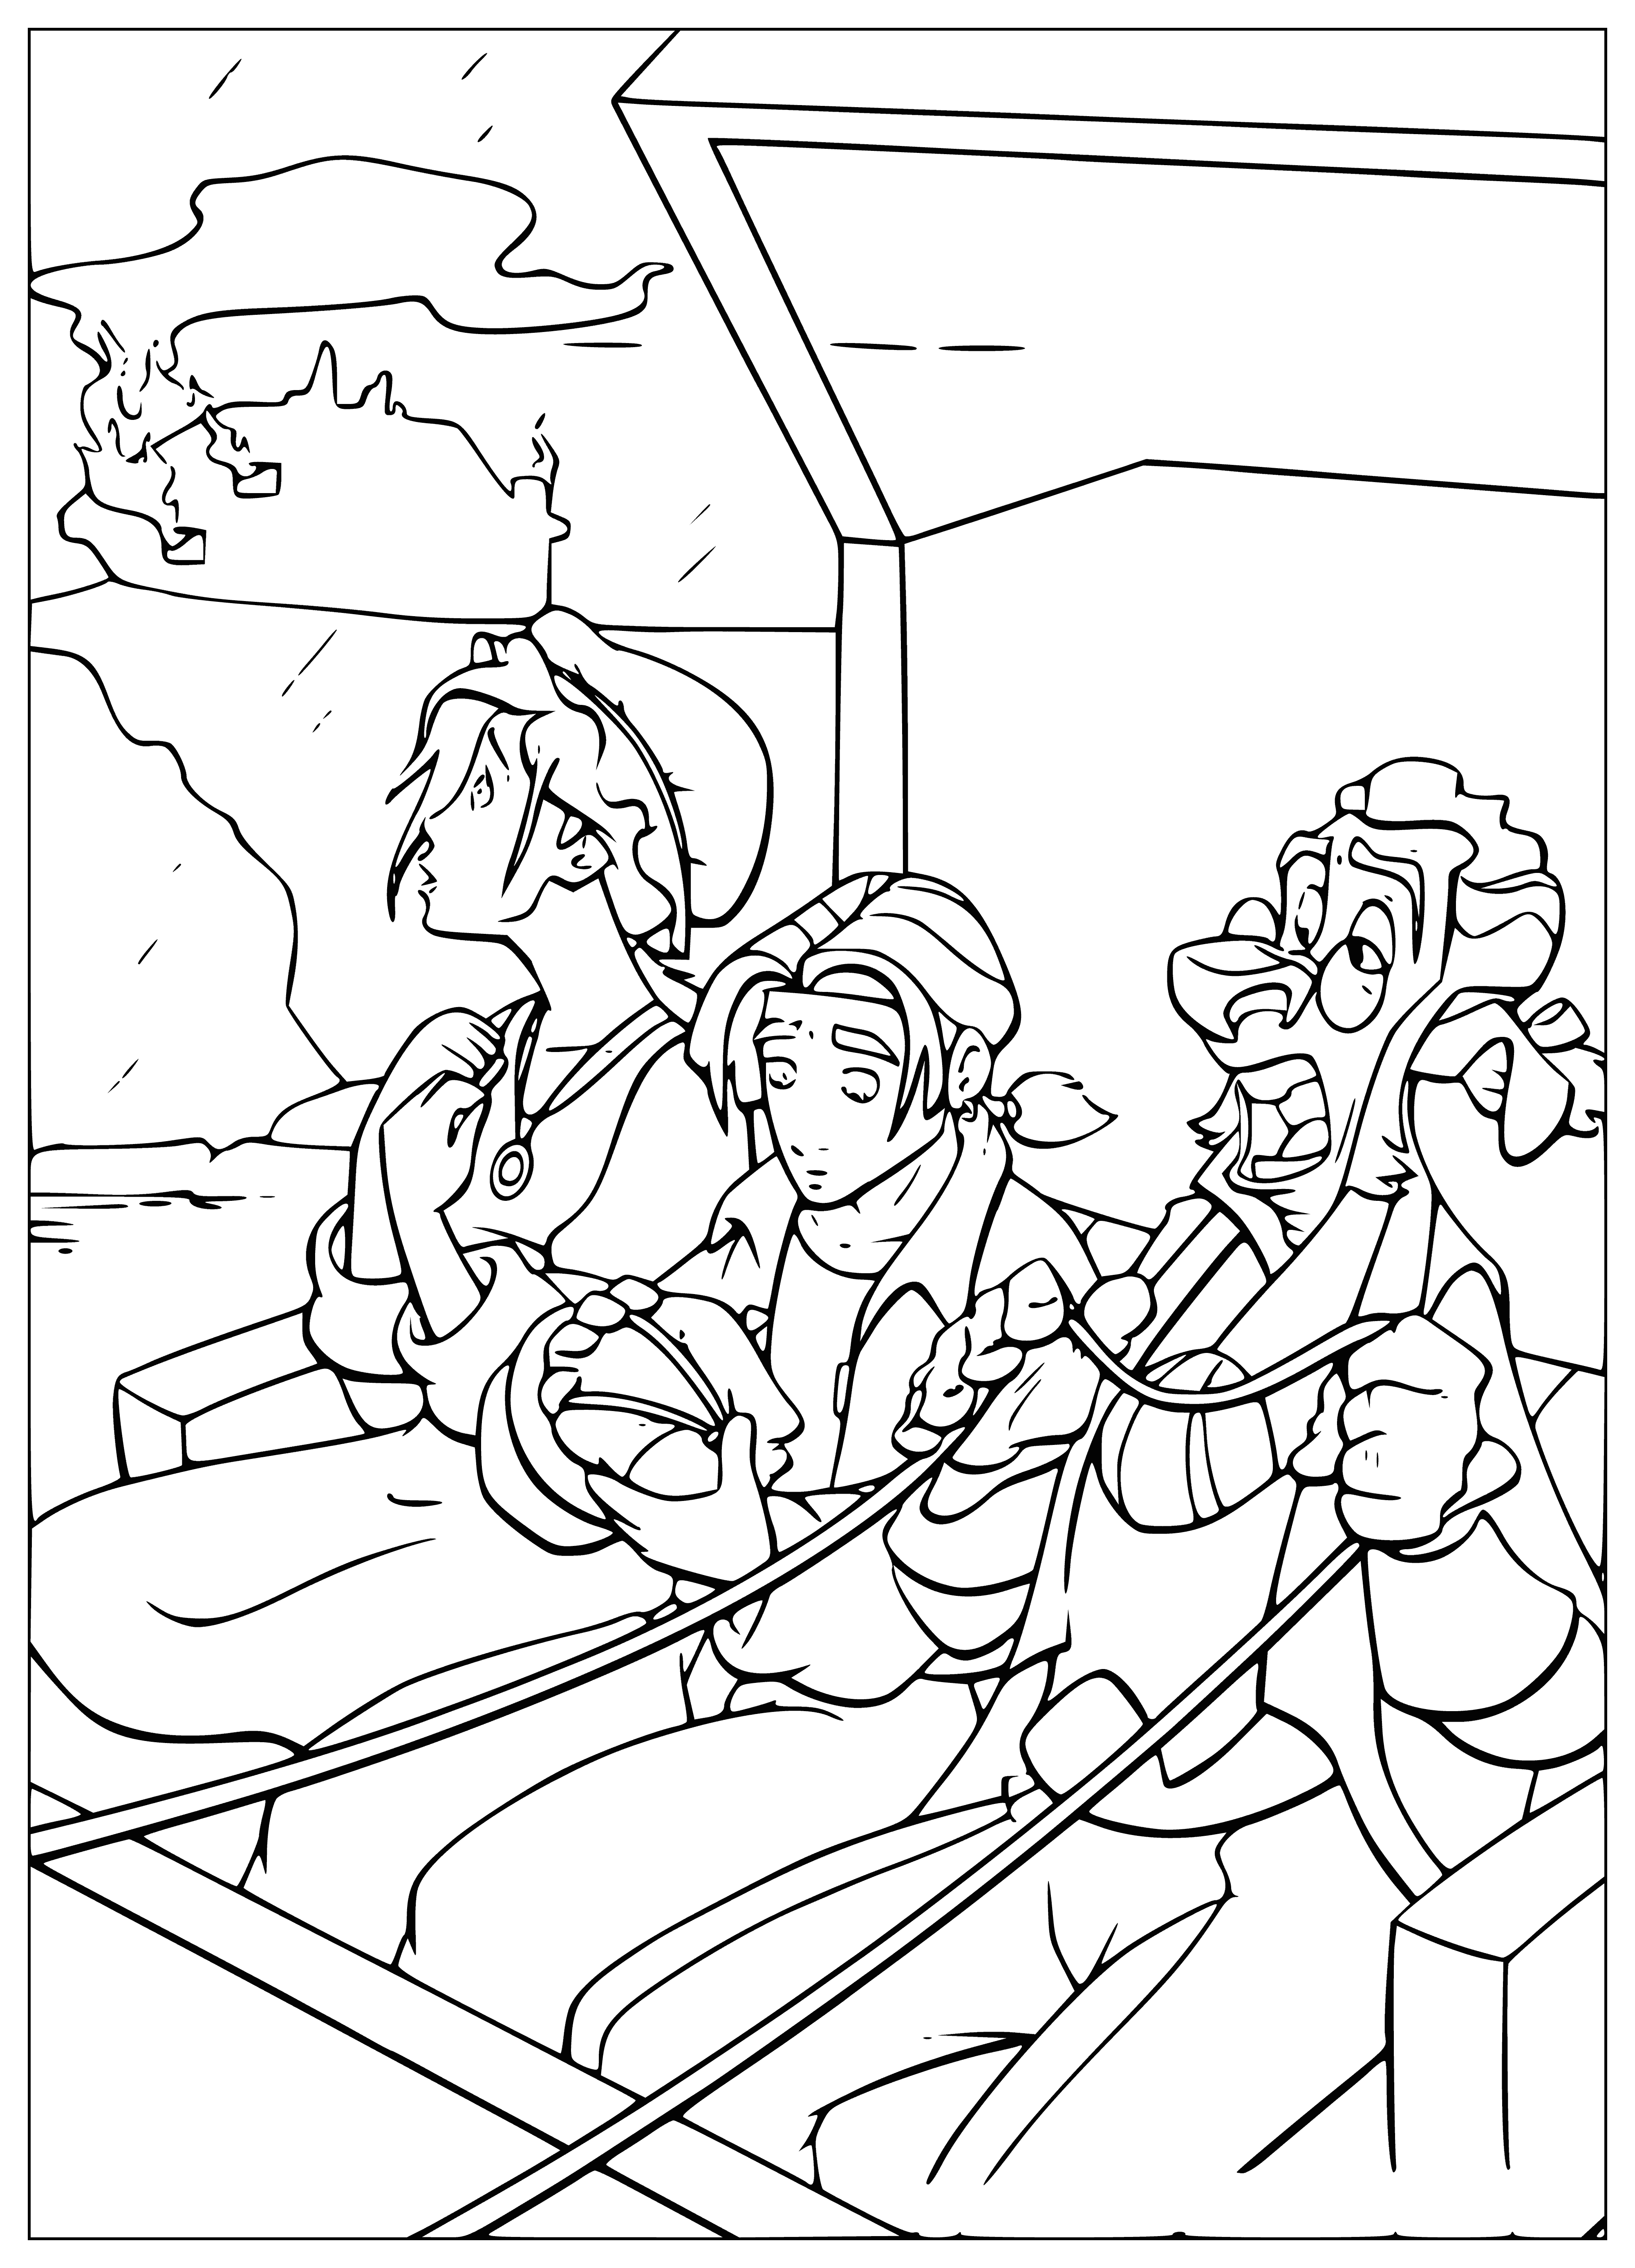 End of the tavern coloring page